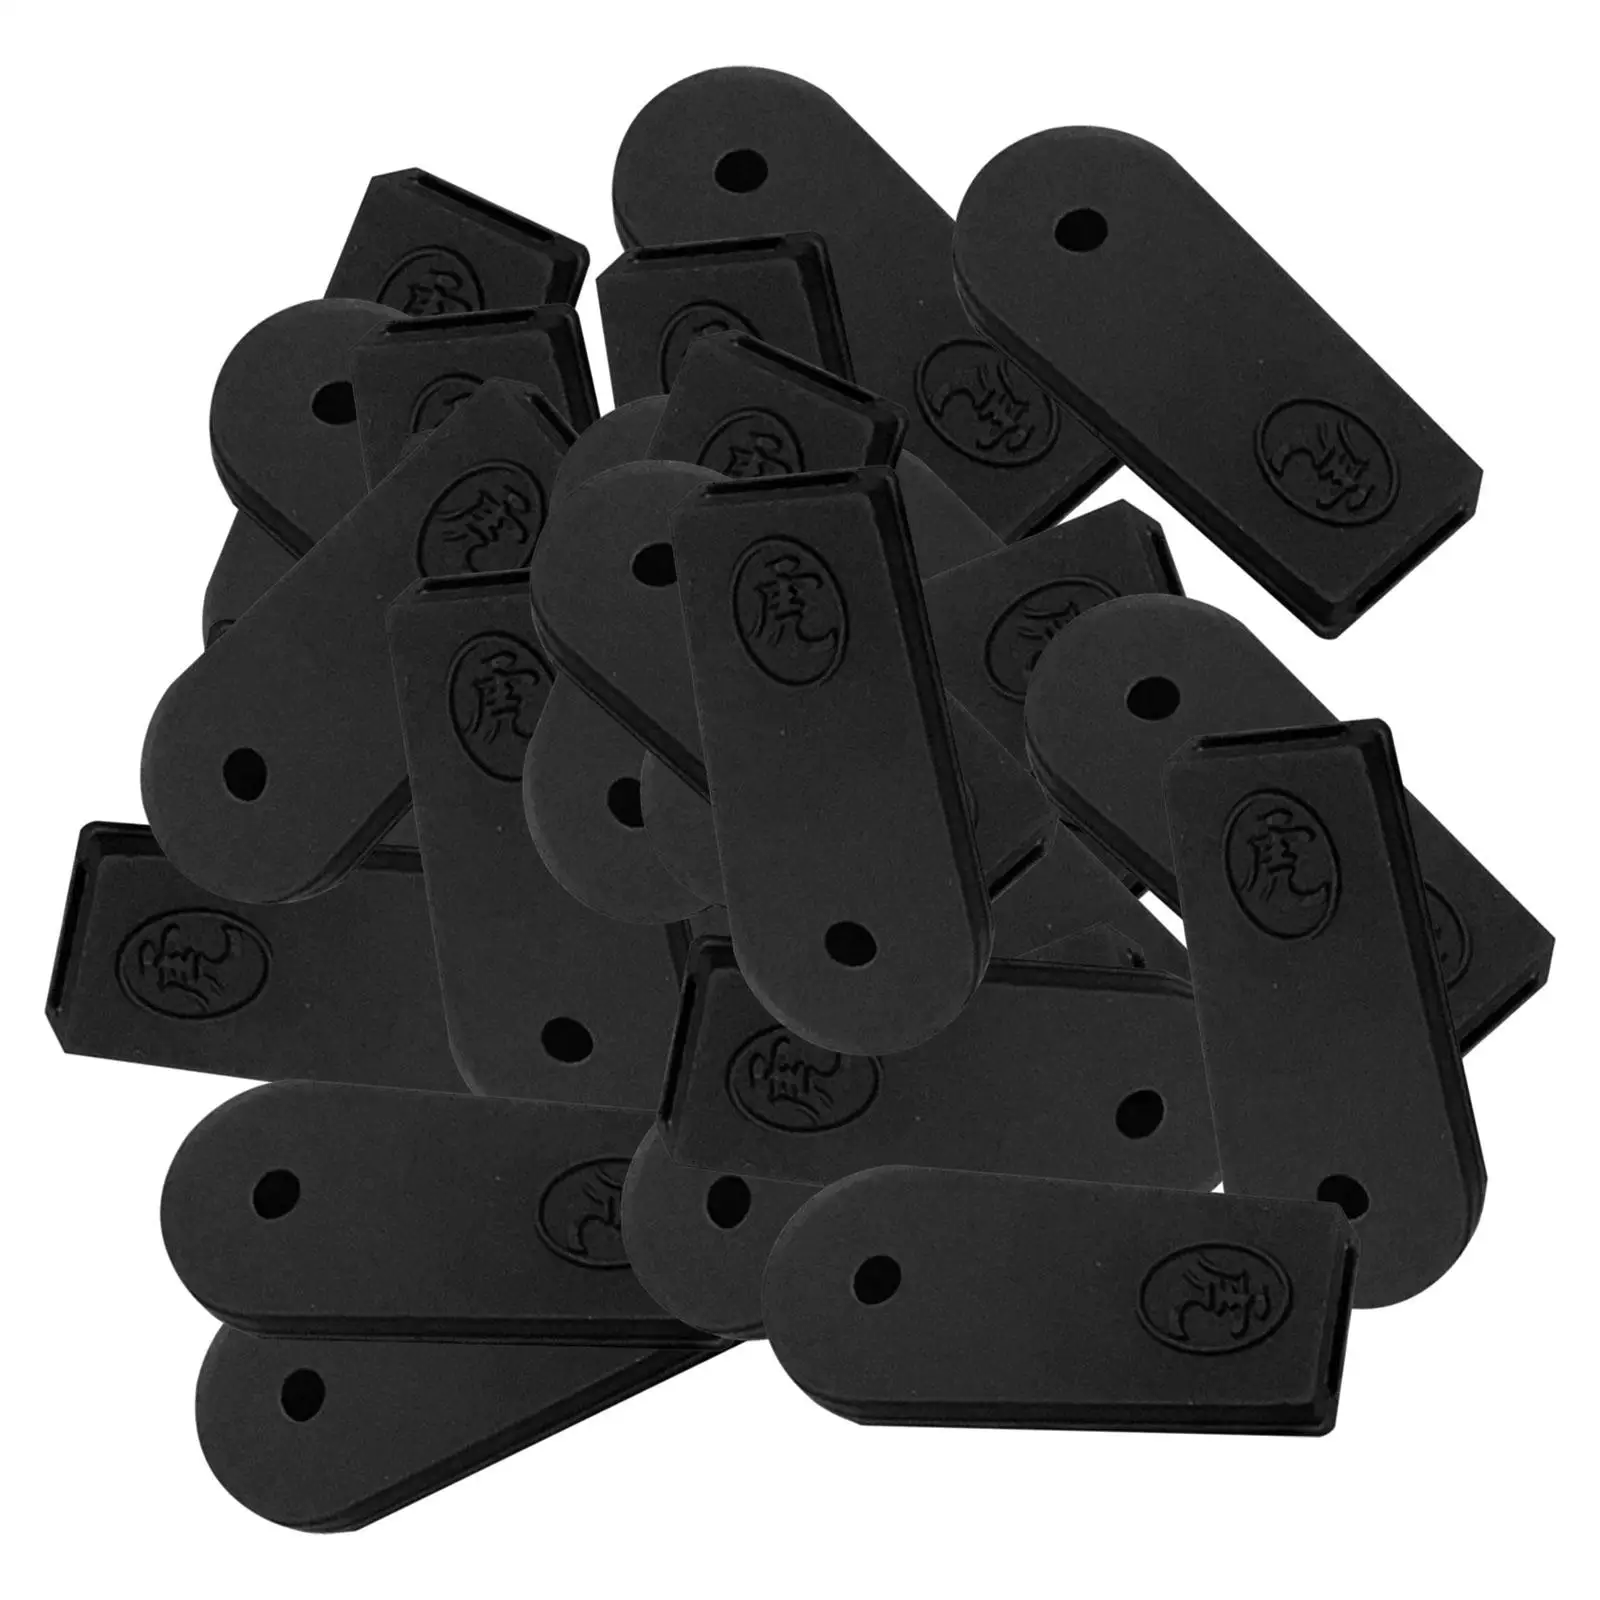 30 Pieces Claw Clip Rubber Cover Automatic Accessories Gift Gaming Machine Claw Sleeve for Claw Crane Game Machine Doll Machine